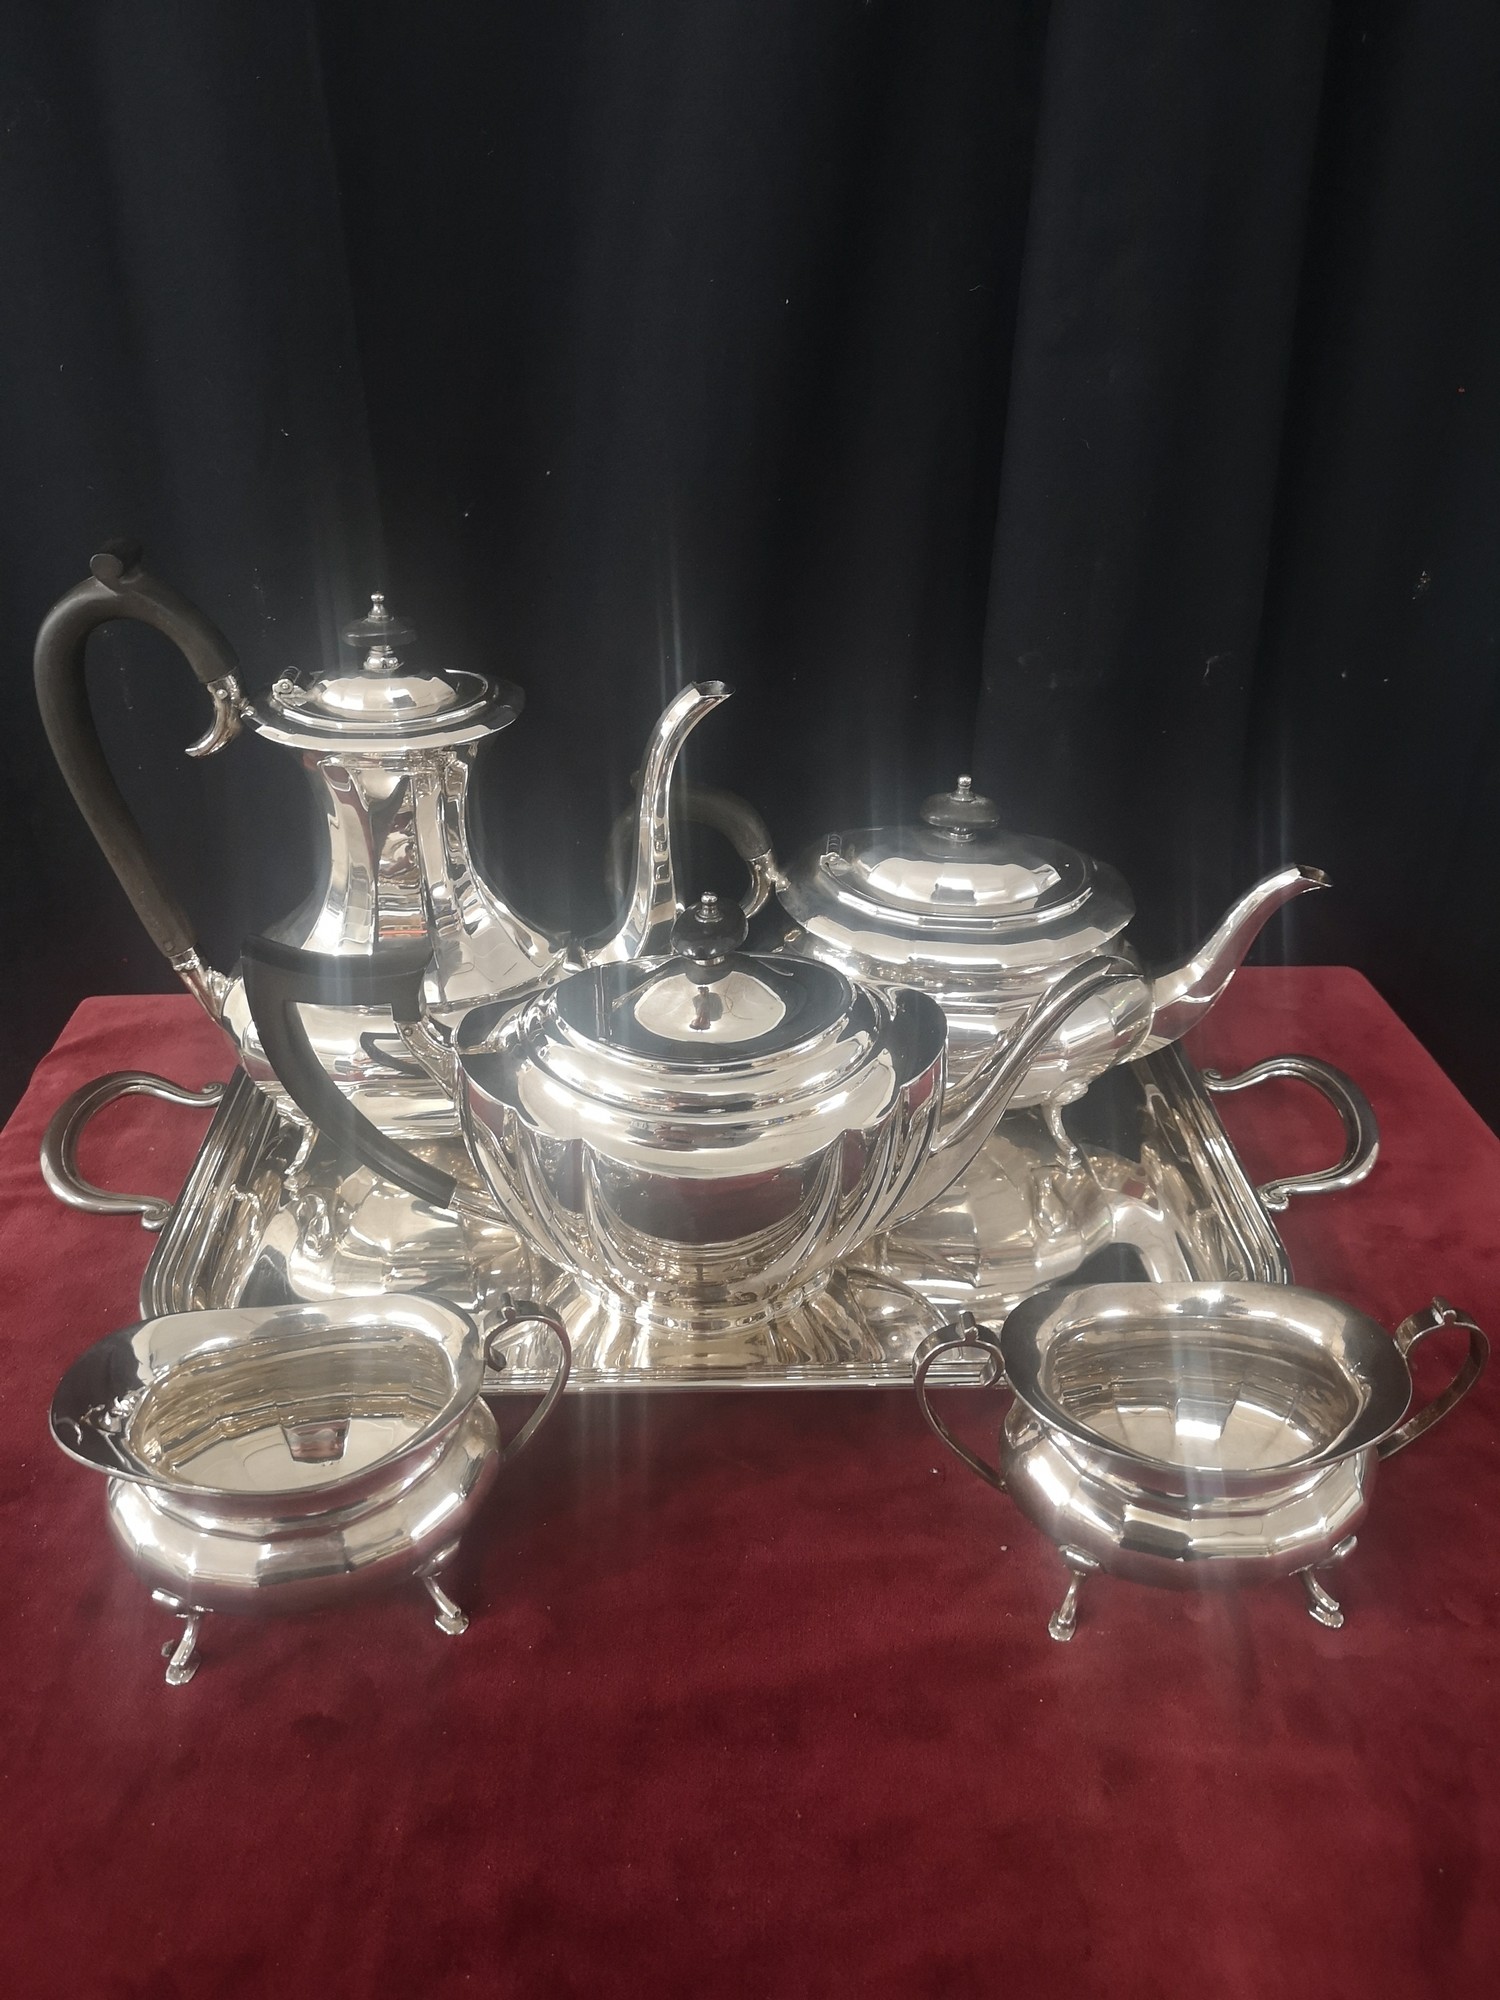 6 piece sheffield silver plated tea service. - Image 2 of 2